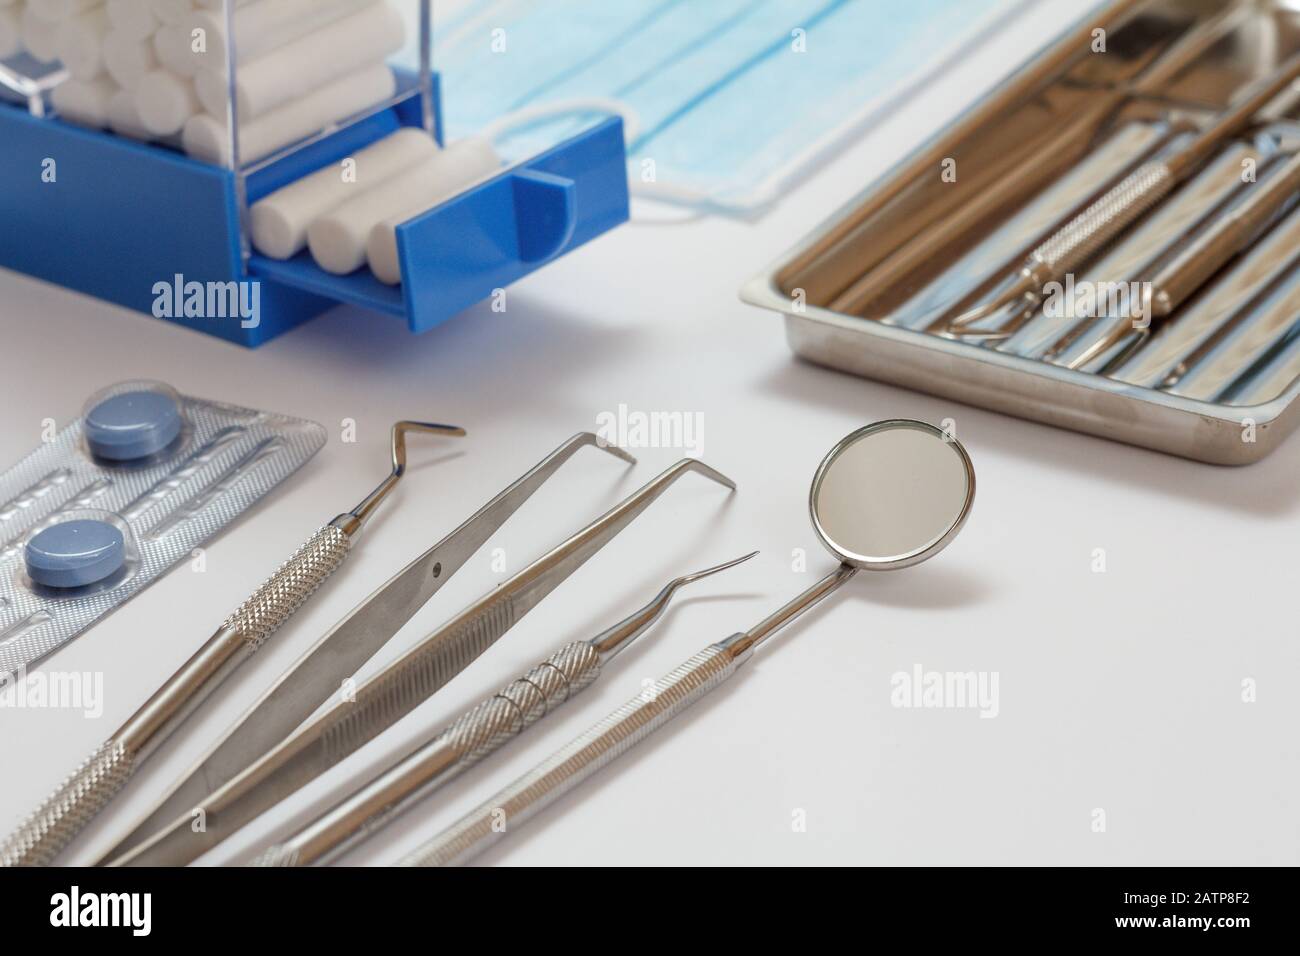 Set of metal dental instruments for dental treatment on white background. Medical tools in stainless steel tray with cotton tampons holder and pills. Stock Photo